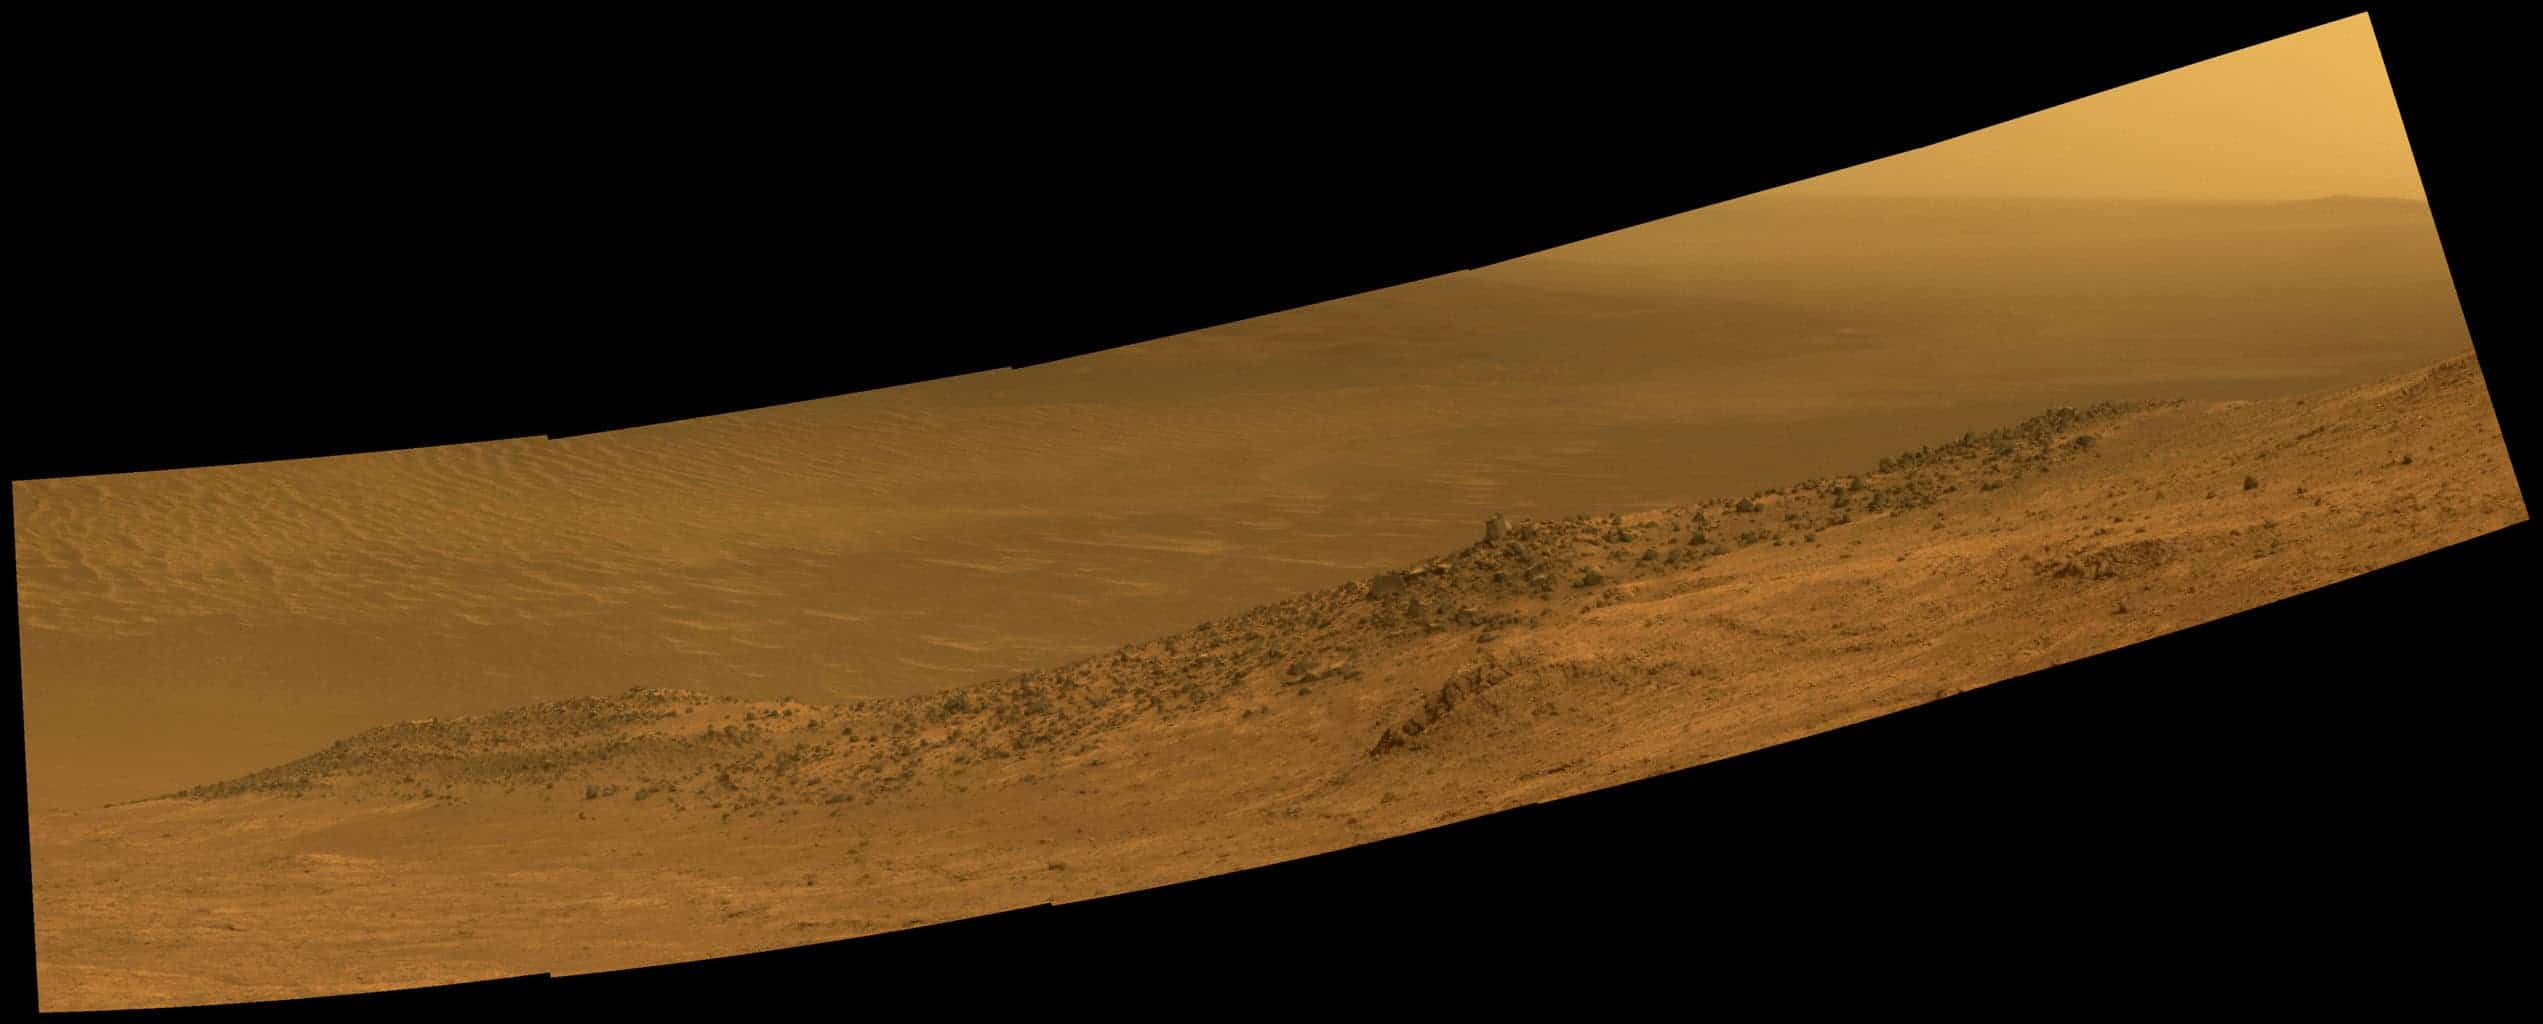 This scene from NASA's Mars Exploration Rover Opportunity shows 